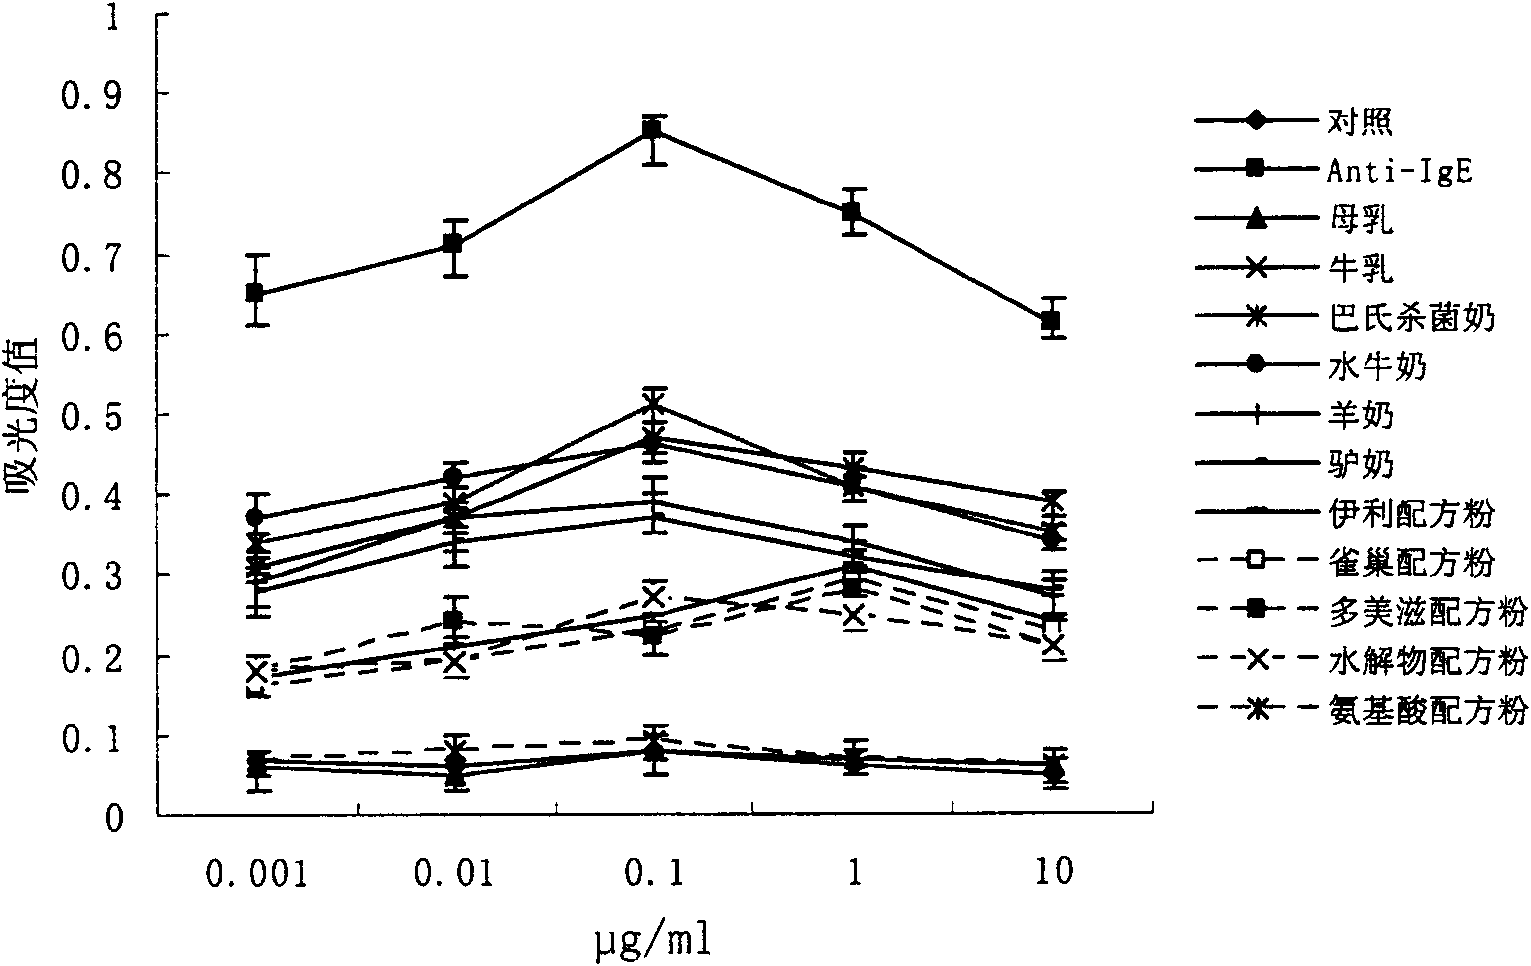 Method for detecting sensitivity of suspected allergen in milk and dairy products